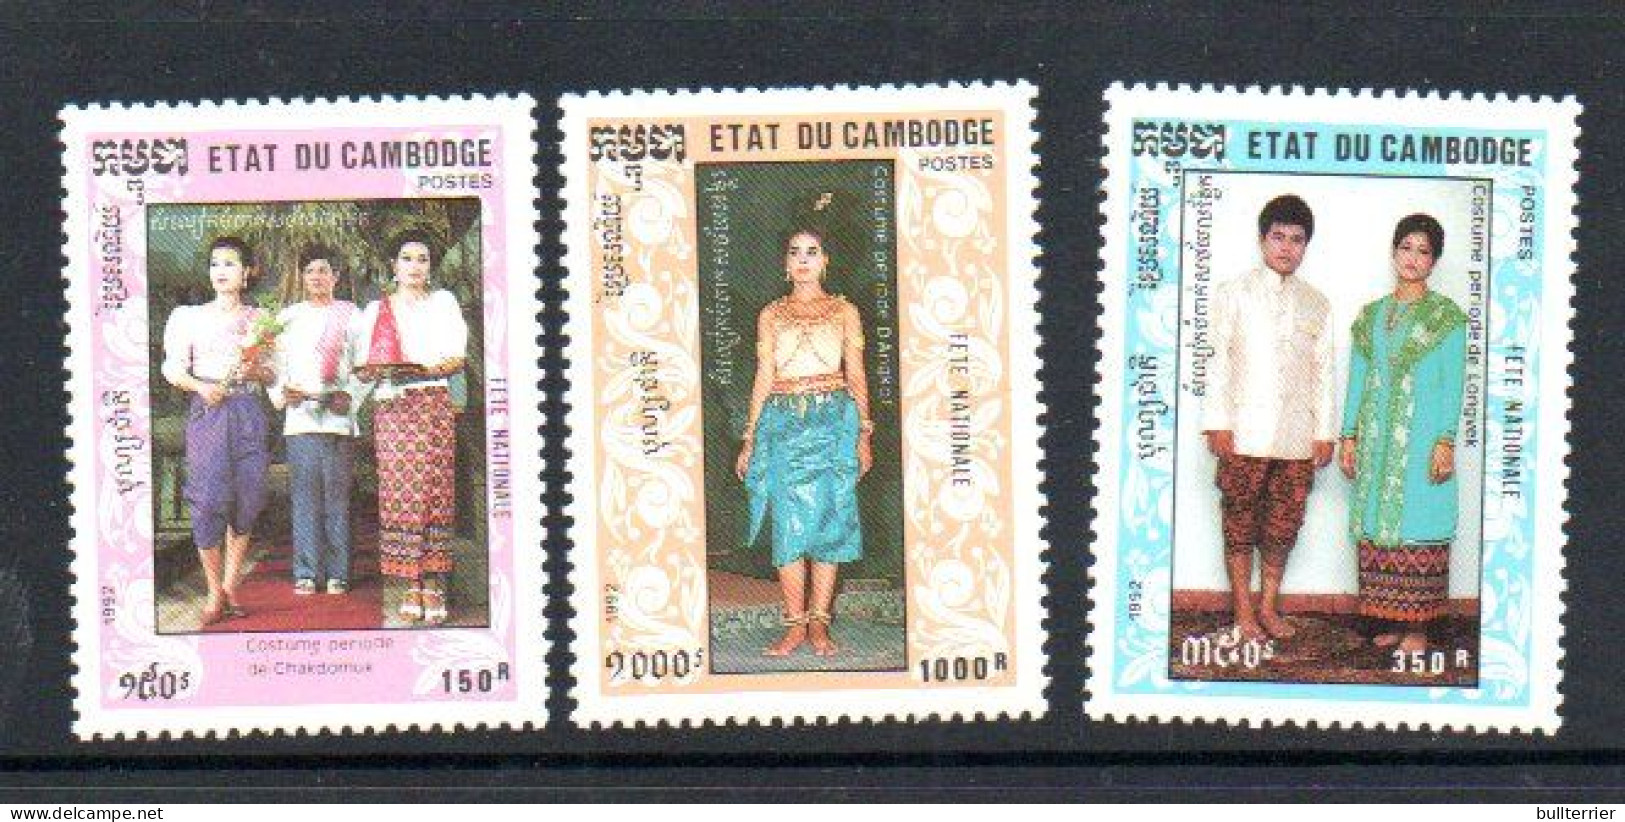 CAMBODIA - 1992- TRADITIONAL COSTUMES SET OF 3  MINT NEVER HINGED - Cambodge